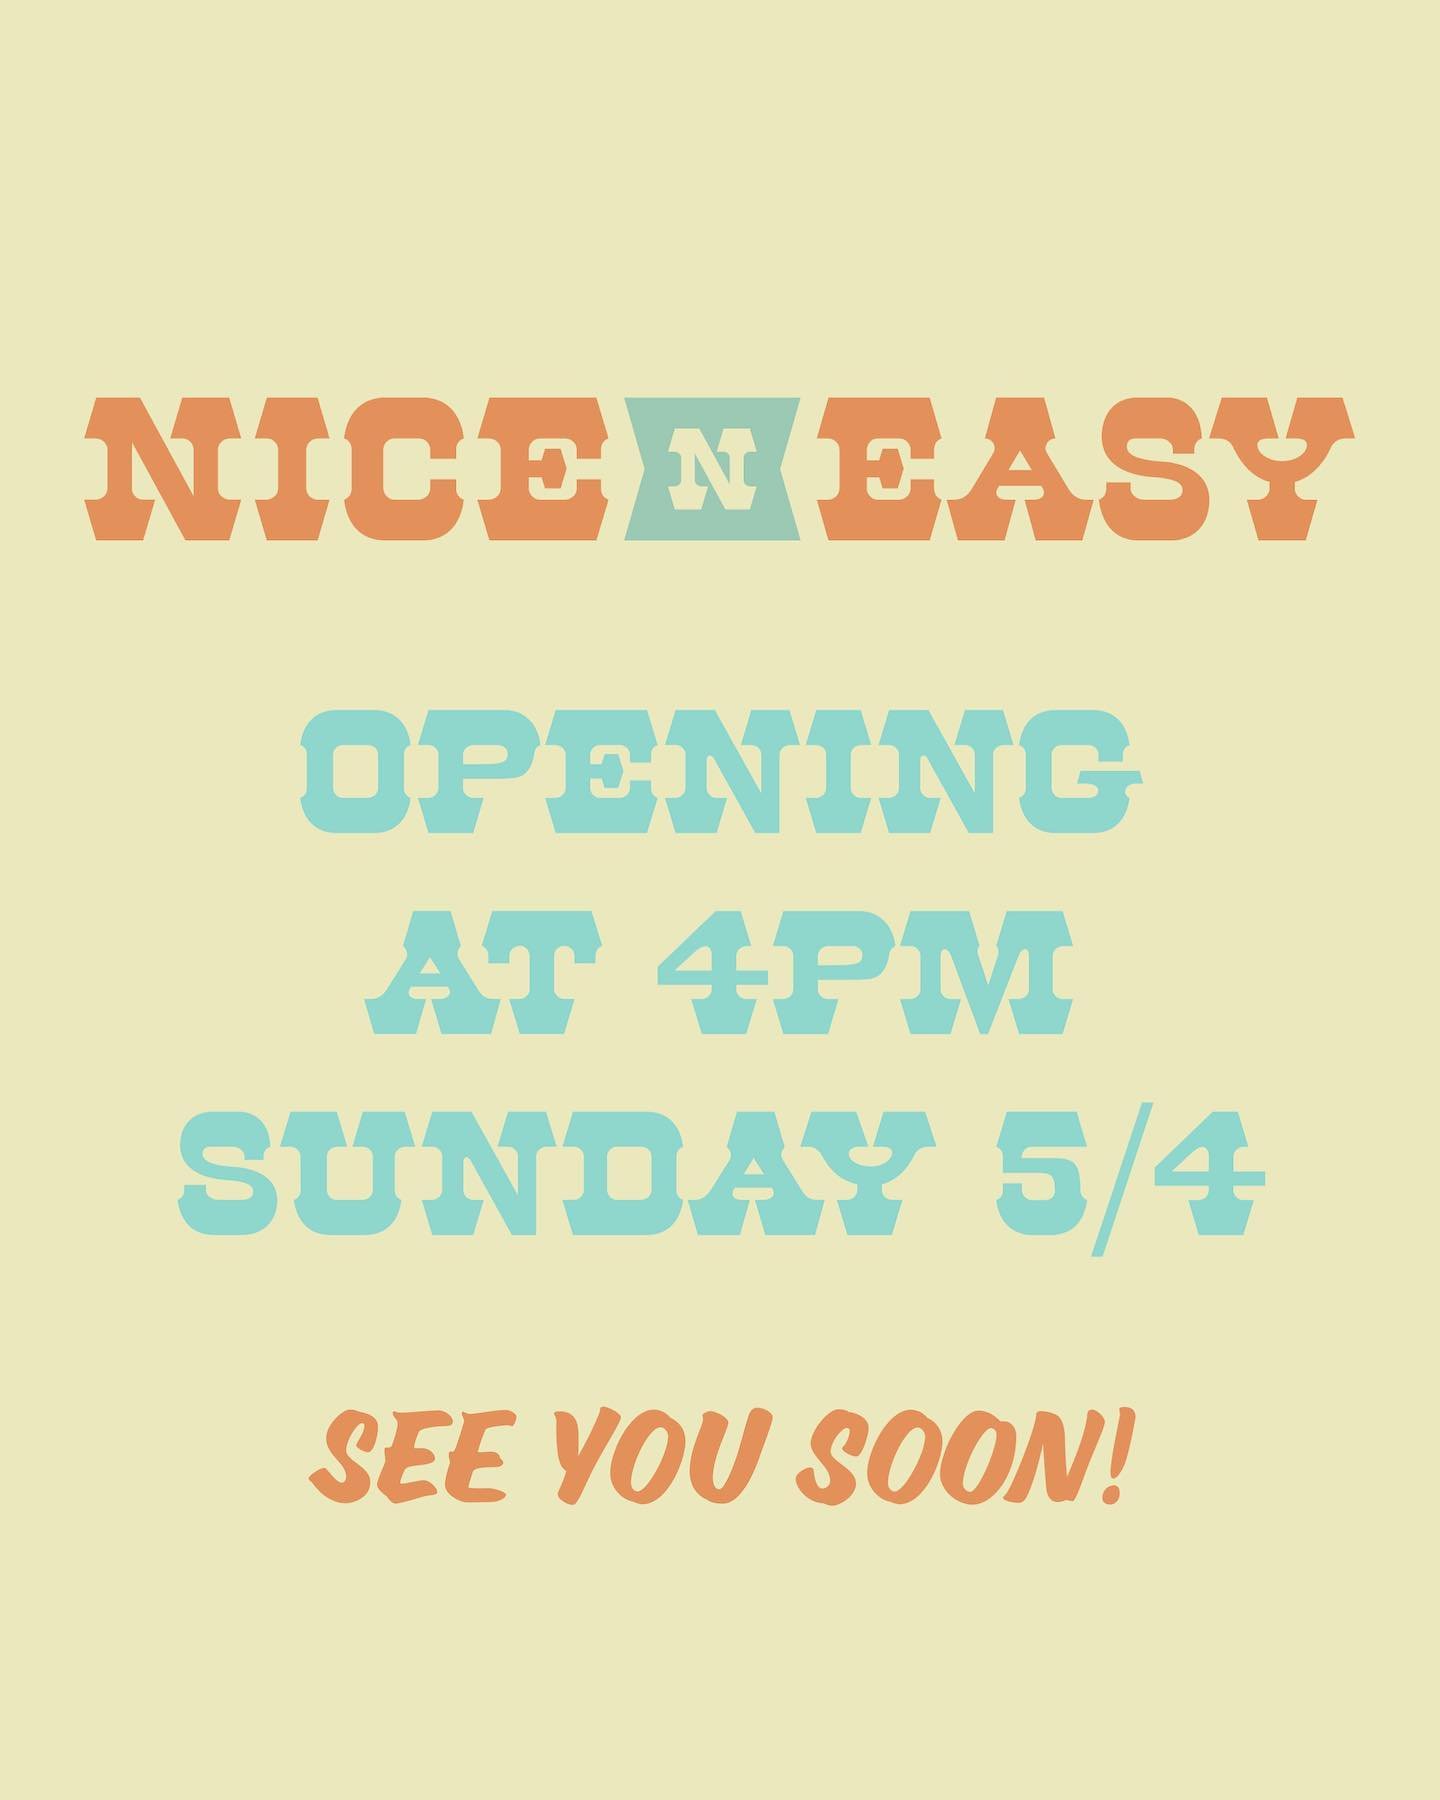 We are opening late tomorrow / Sunday, 5/4! We are hosting a private event early, and will be open to the public at 4PM.
.
.
If you are interested in hosting a private event @niceneasytx , shoot us an email - howdy@niceneasytx.com for more info!